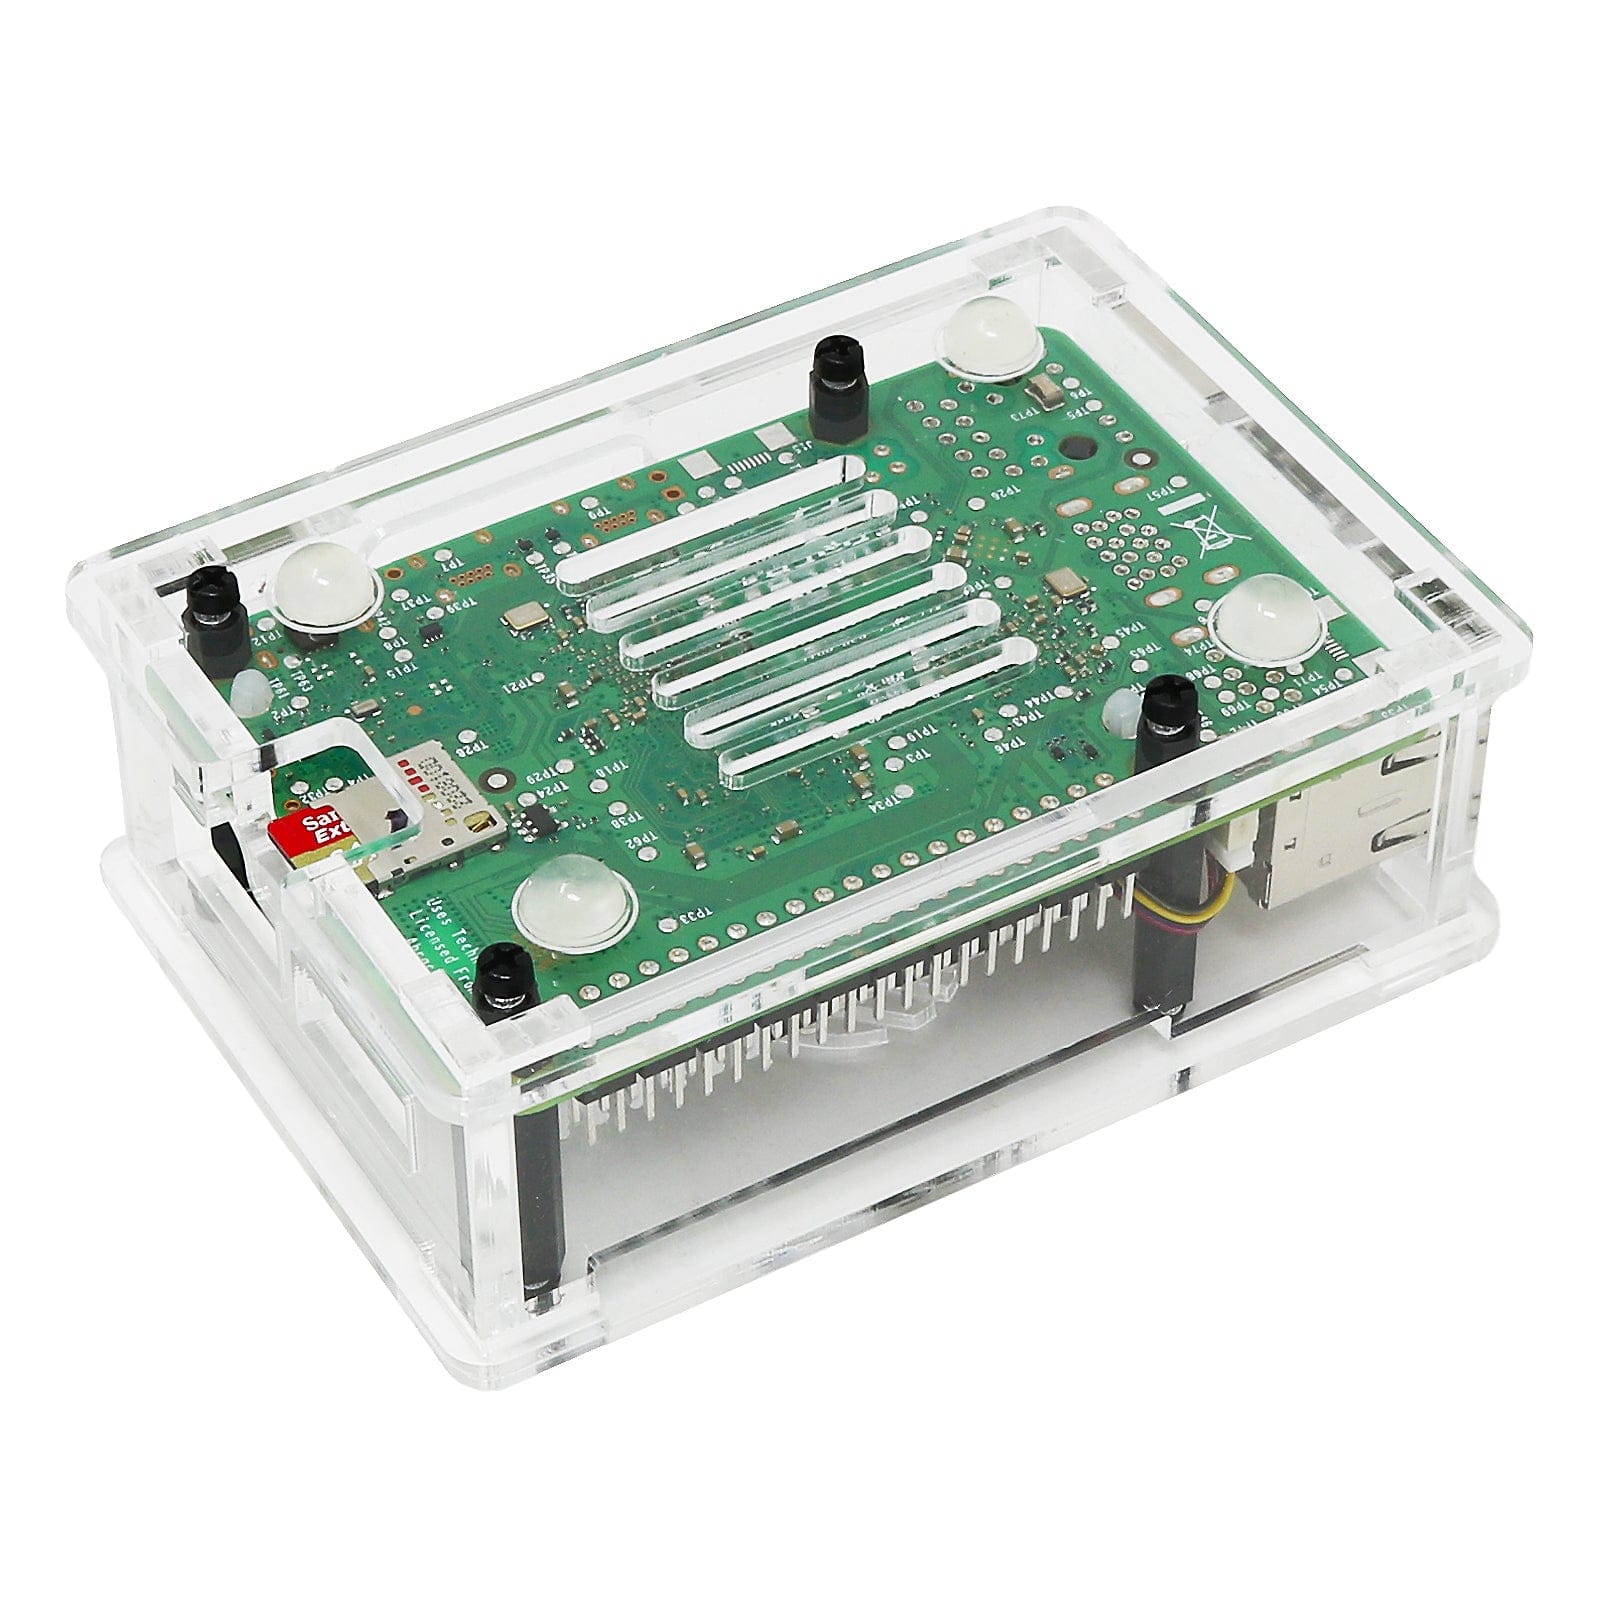 Case for Raspberry Pi 5 and Active Cooler - The Pi Hut